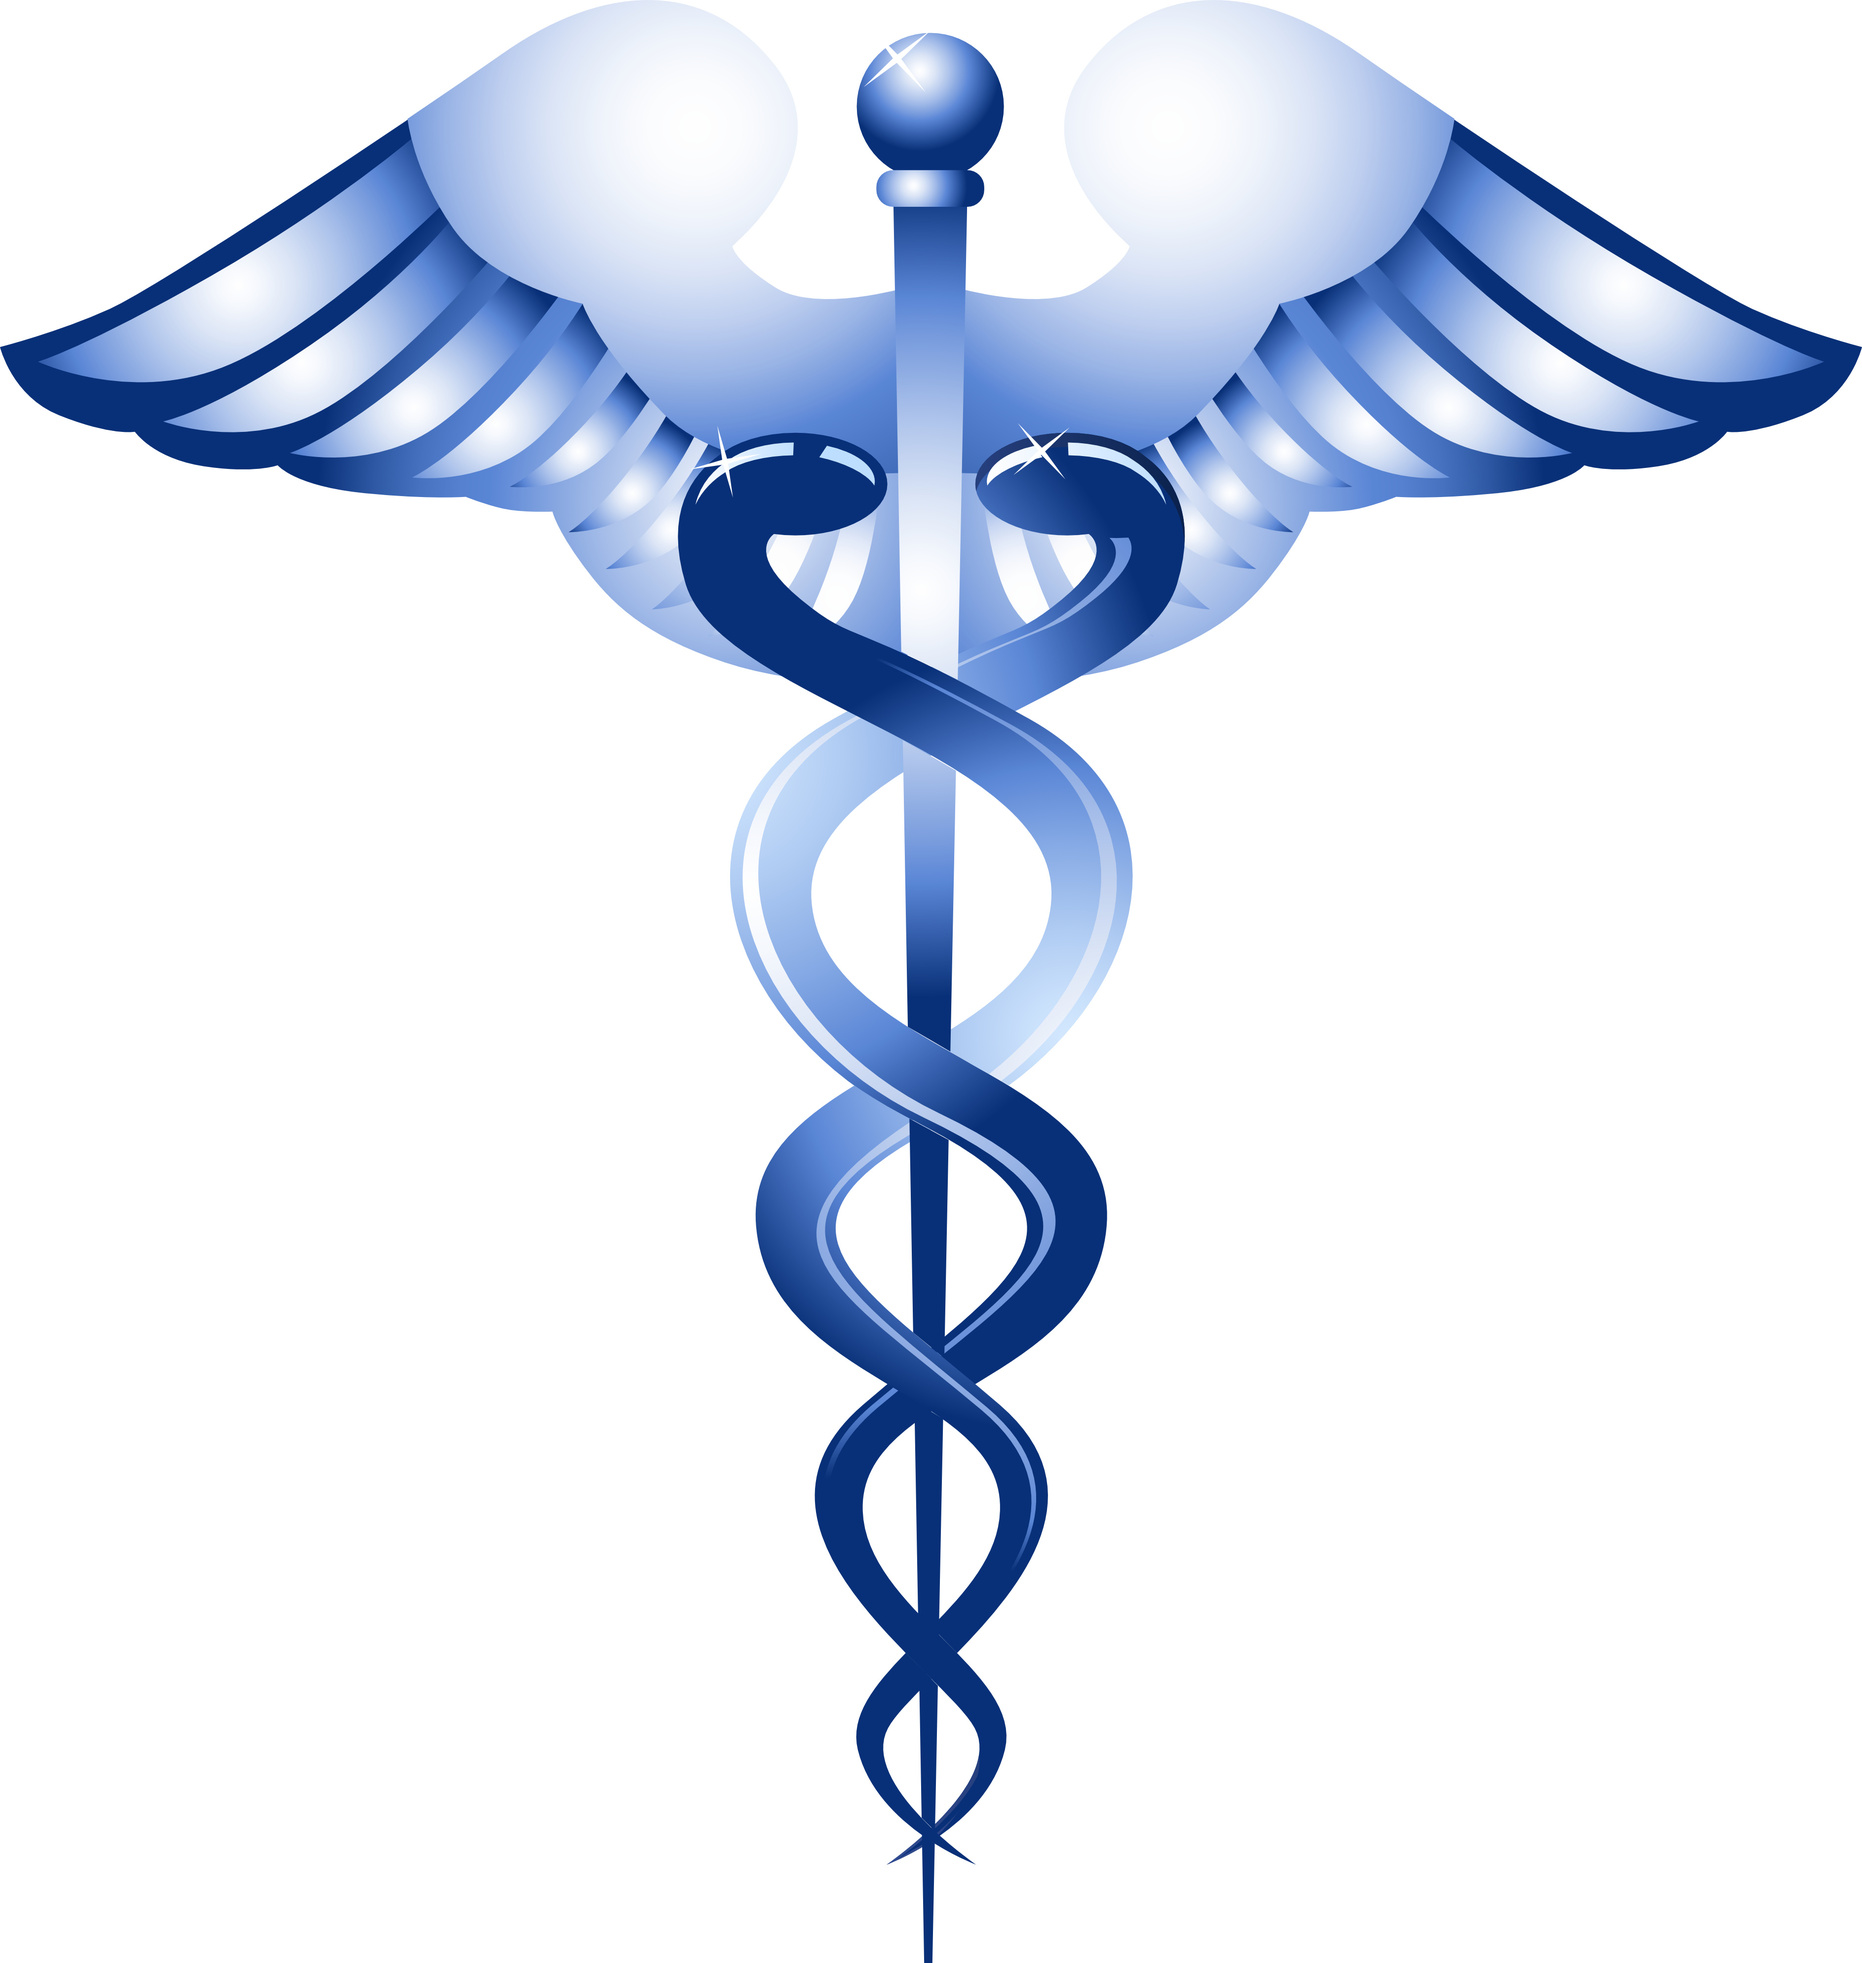 38 Medical Symbol Png Free Cliparts That You Can Download To You